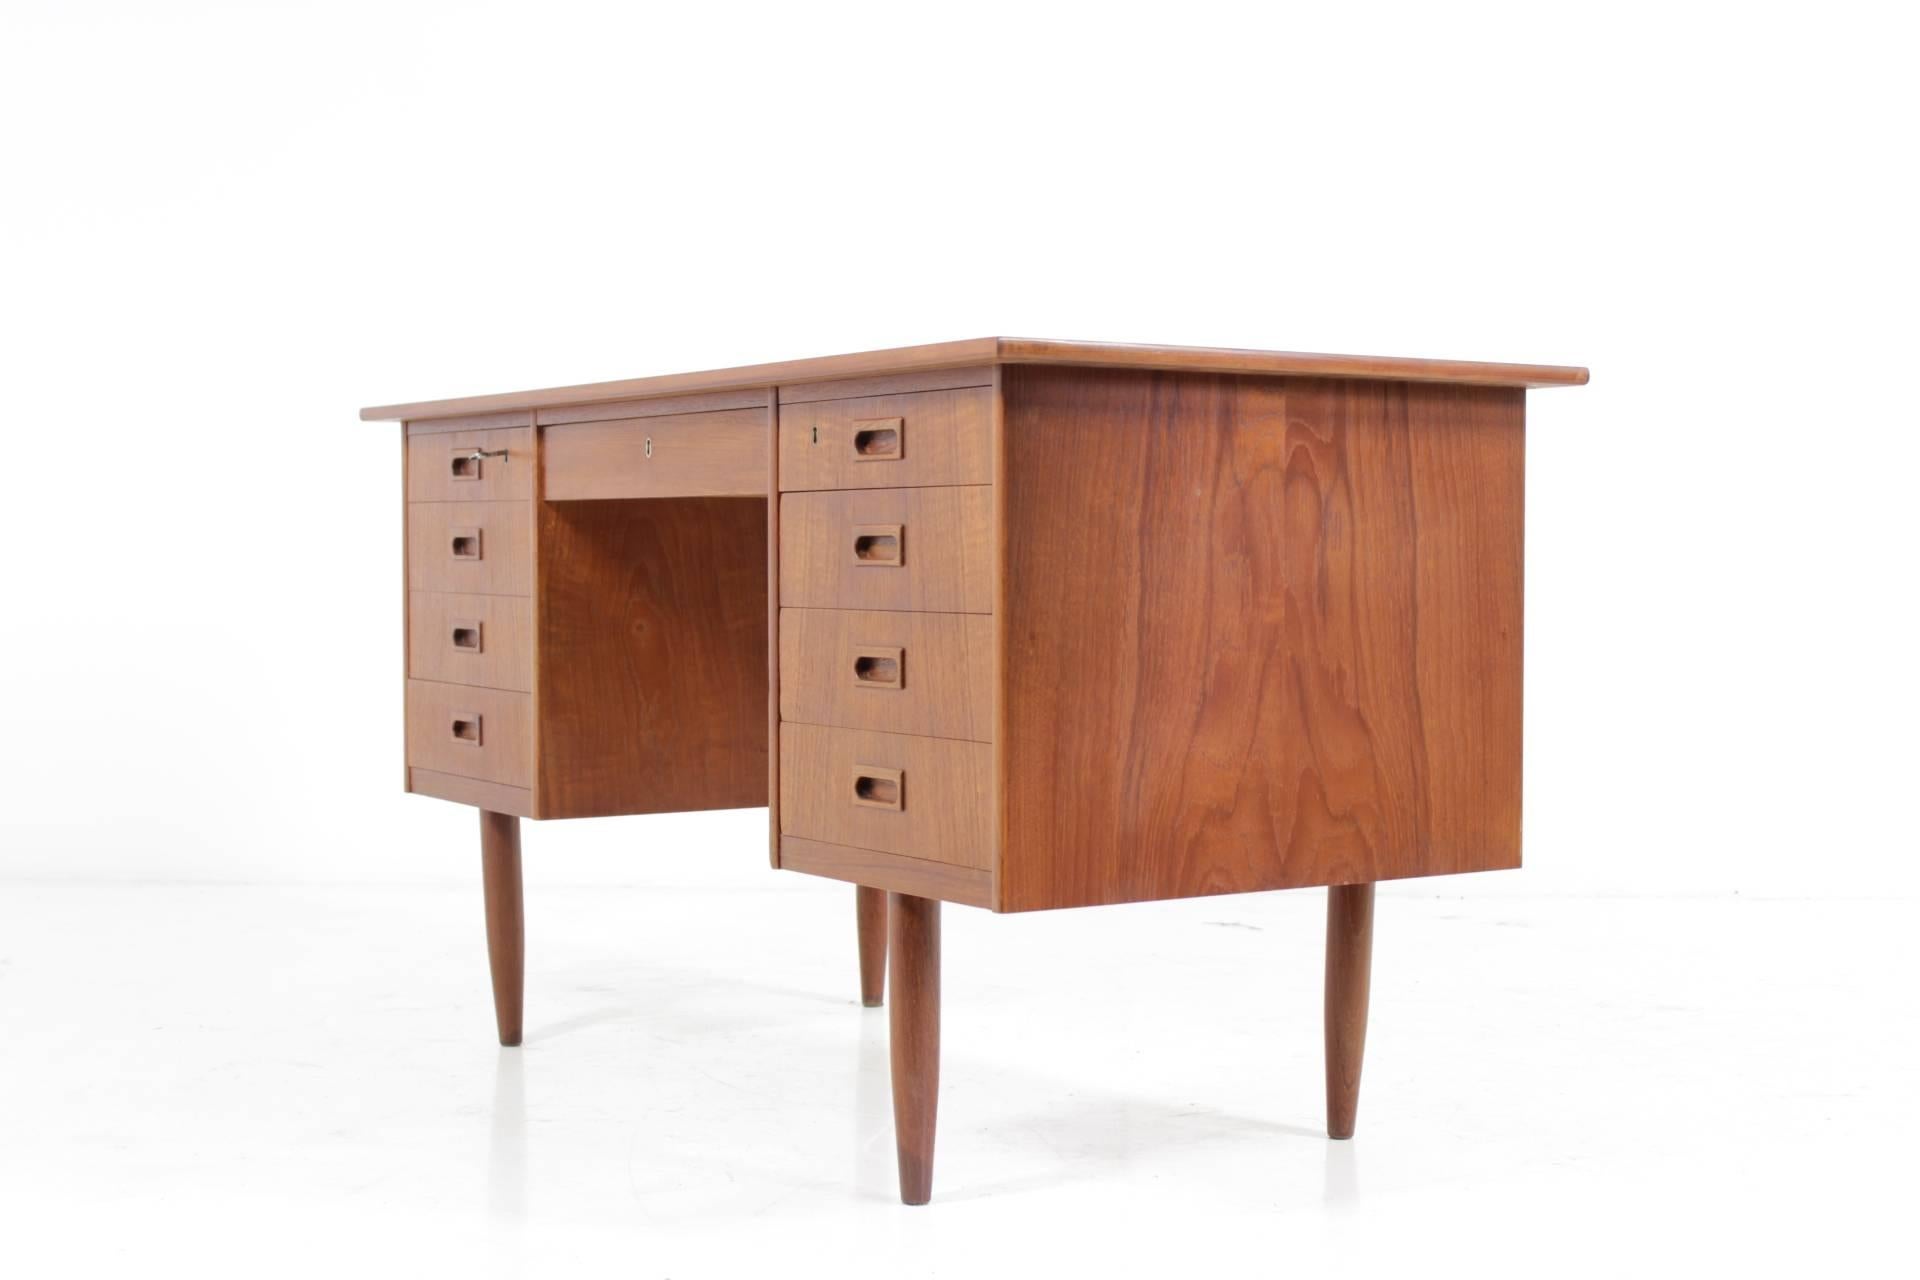 Danish writing desk made in circa 1960s. The item was carefully restored.